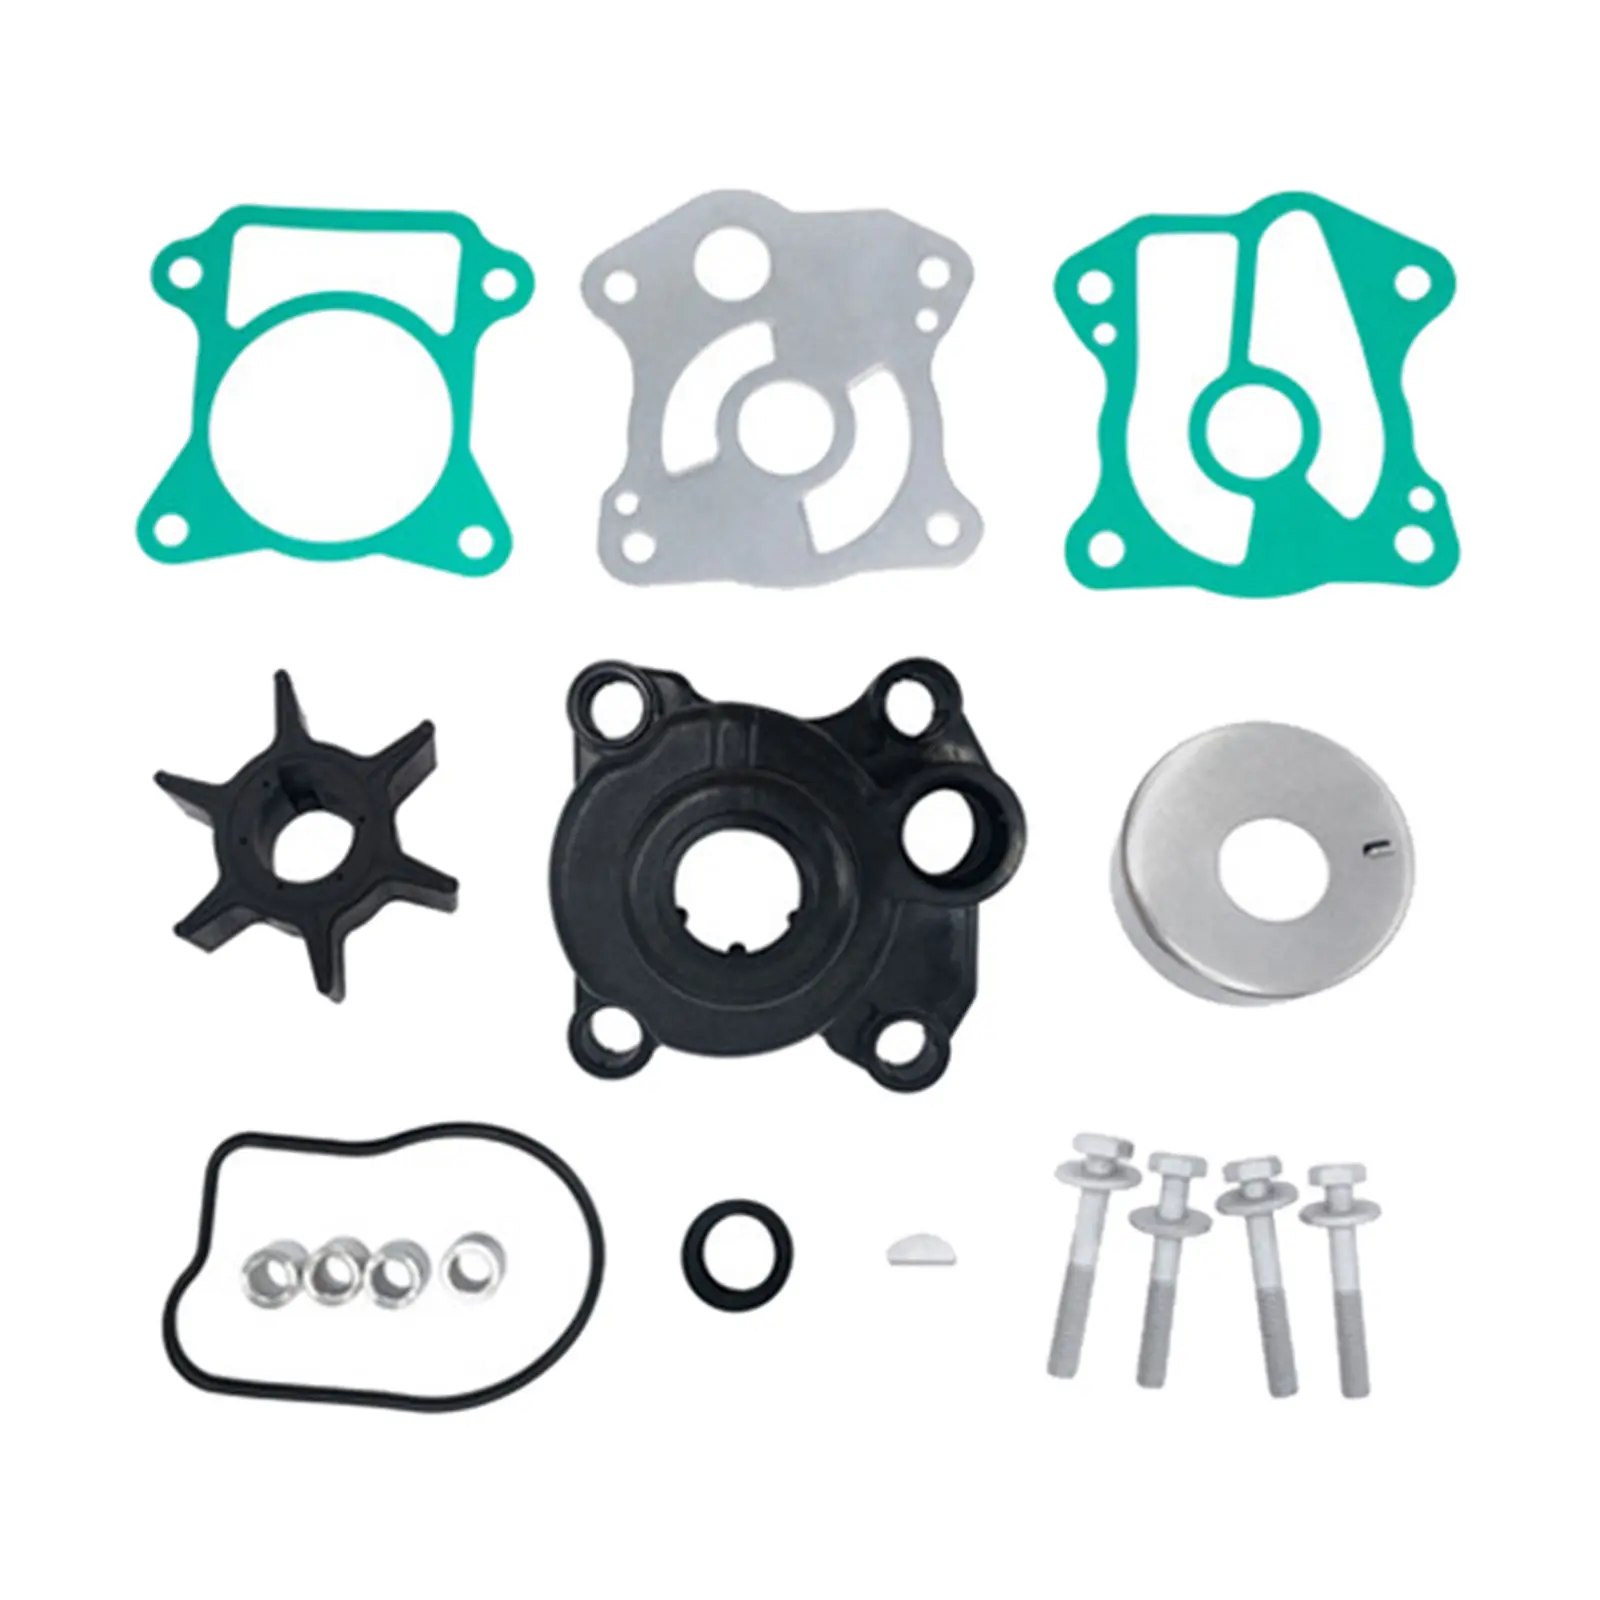 Water Pump Impeller Kit for Honda BF30A BF30D 06193-ZV7-020 06193-ZV7-010 Outboard Engines Replace